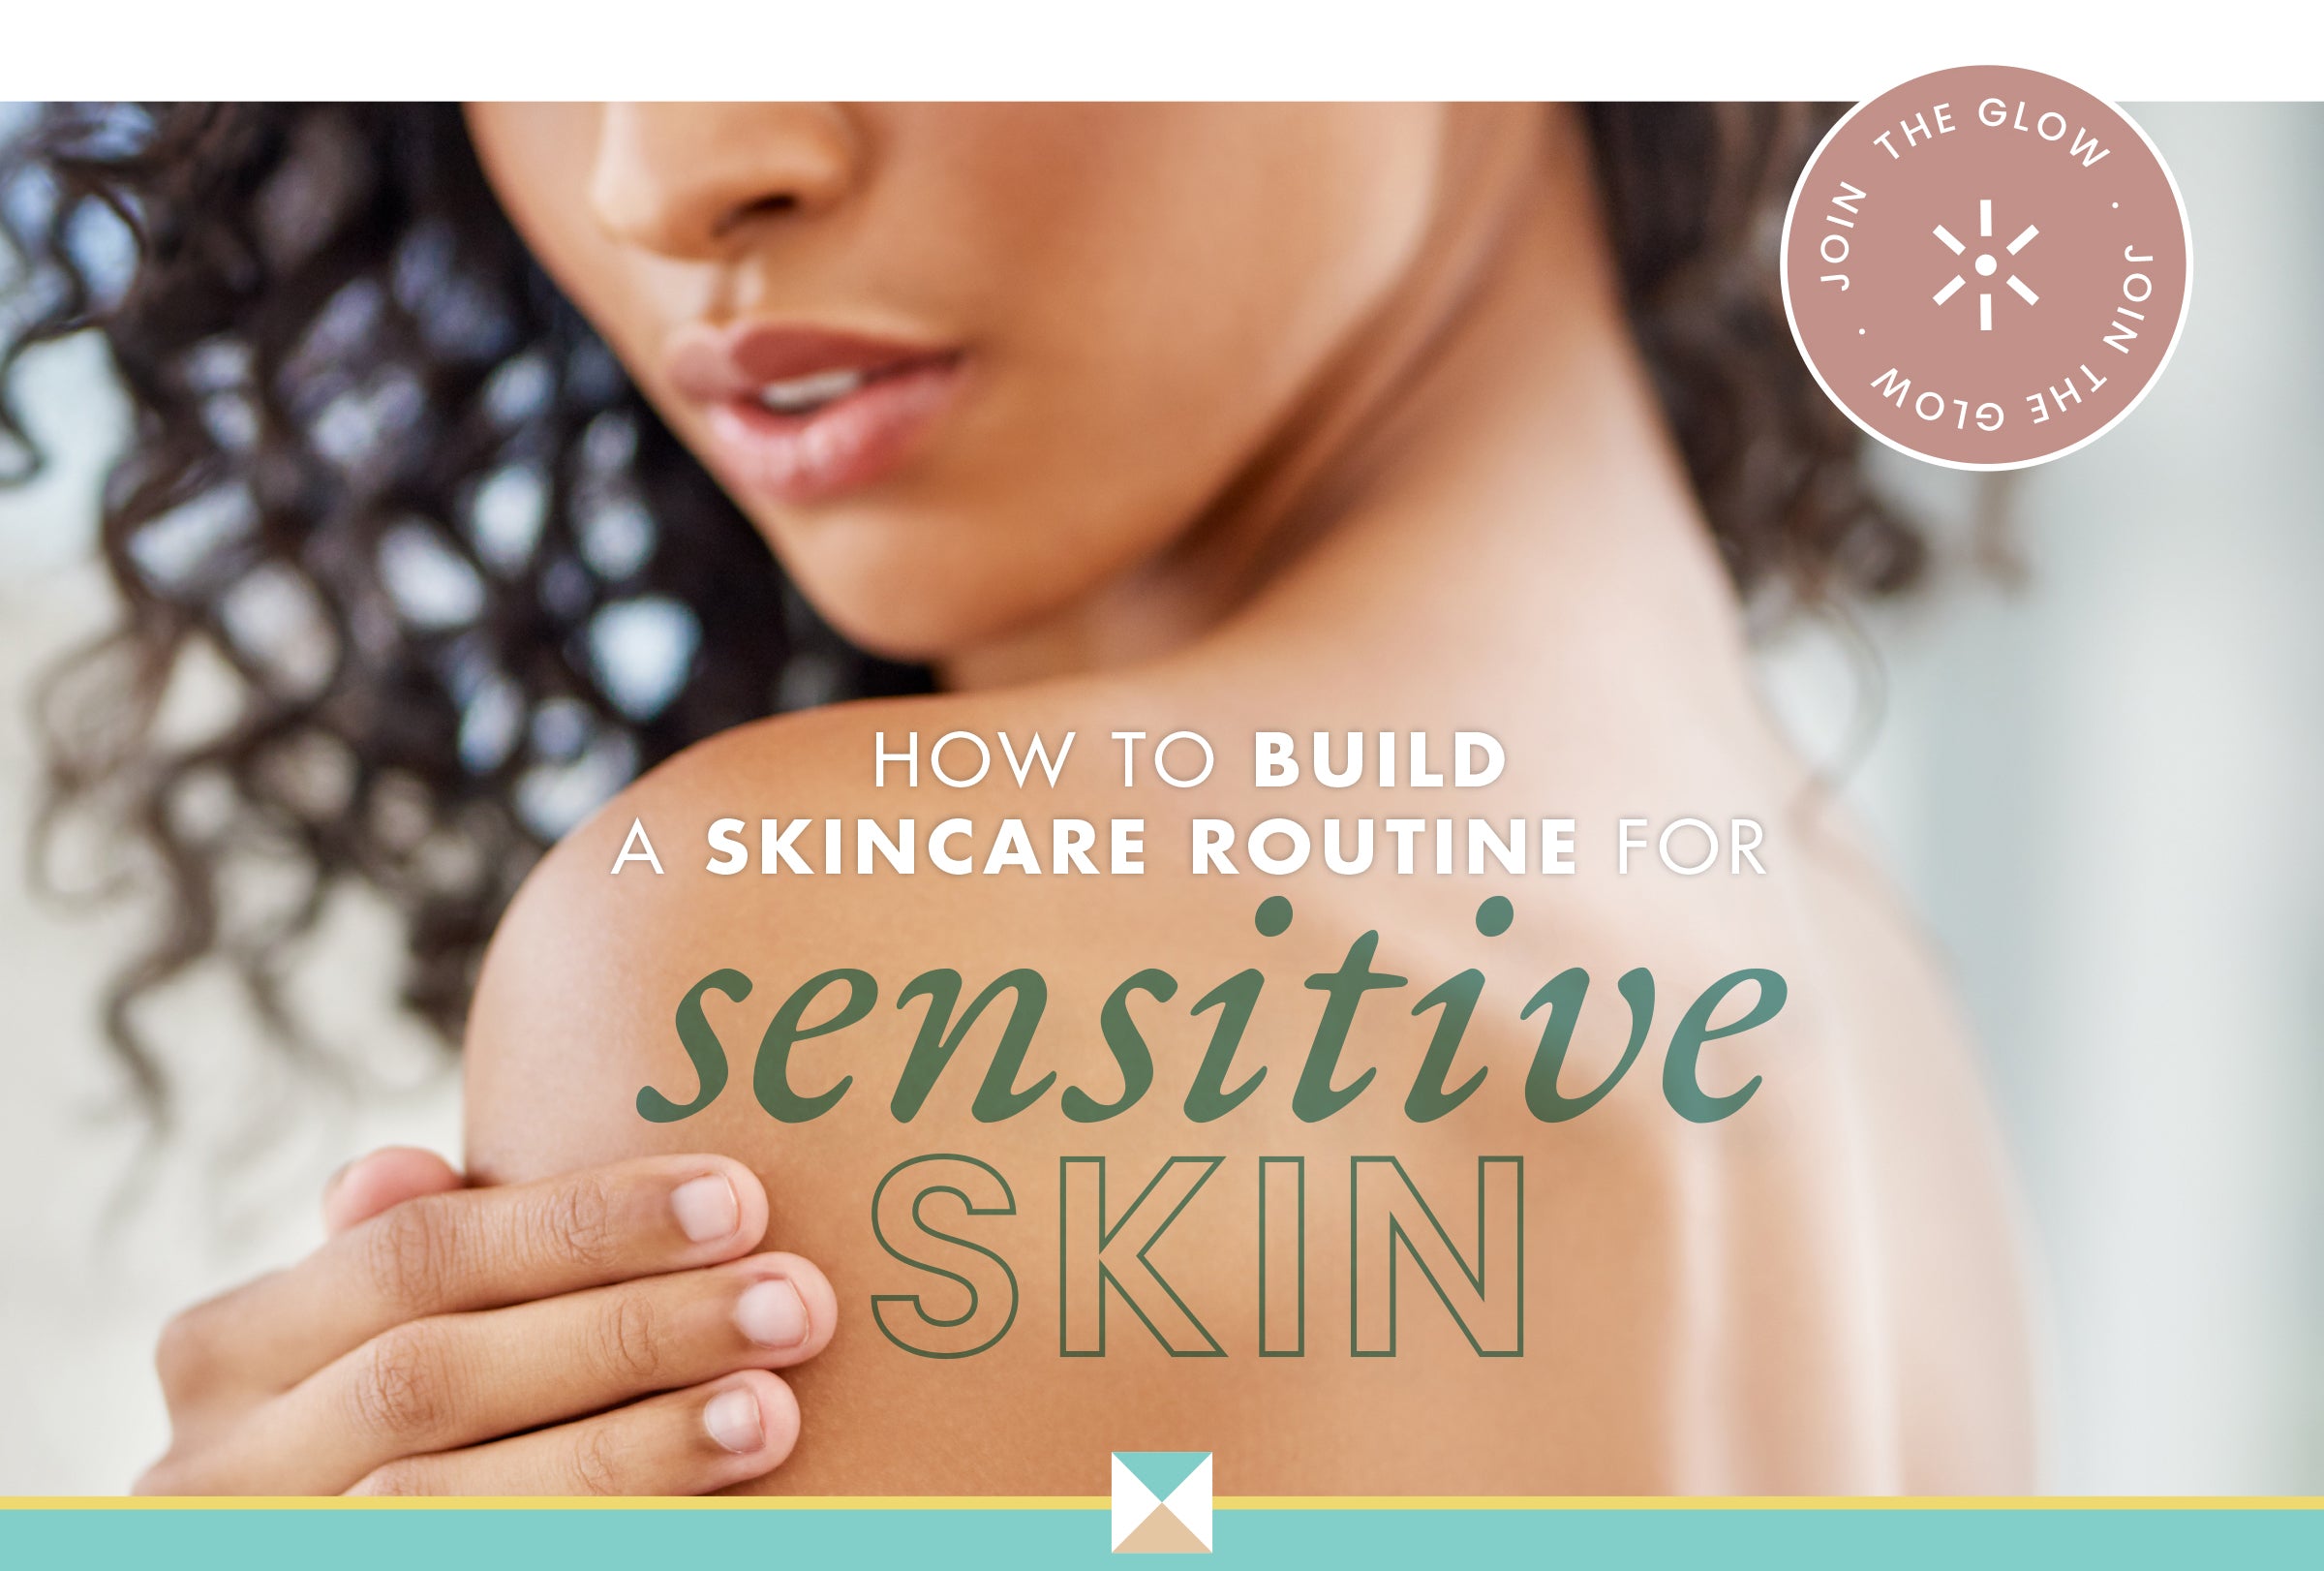 Tips on Building a Skincare Routine for Sensitive Skin